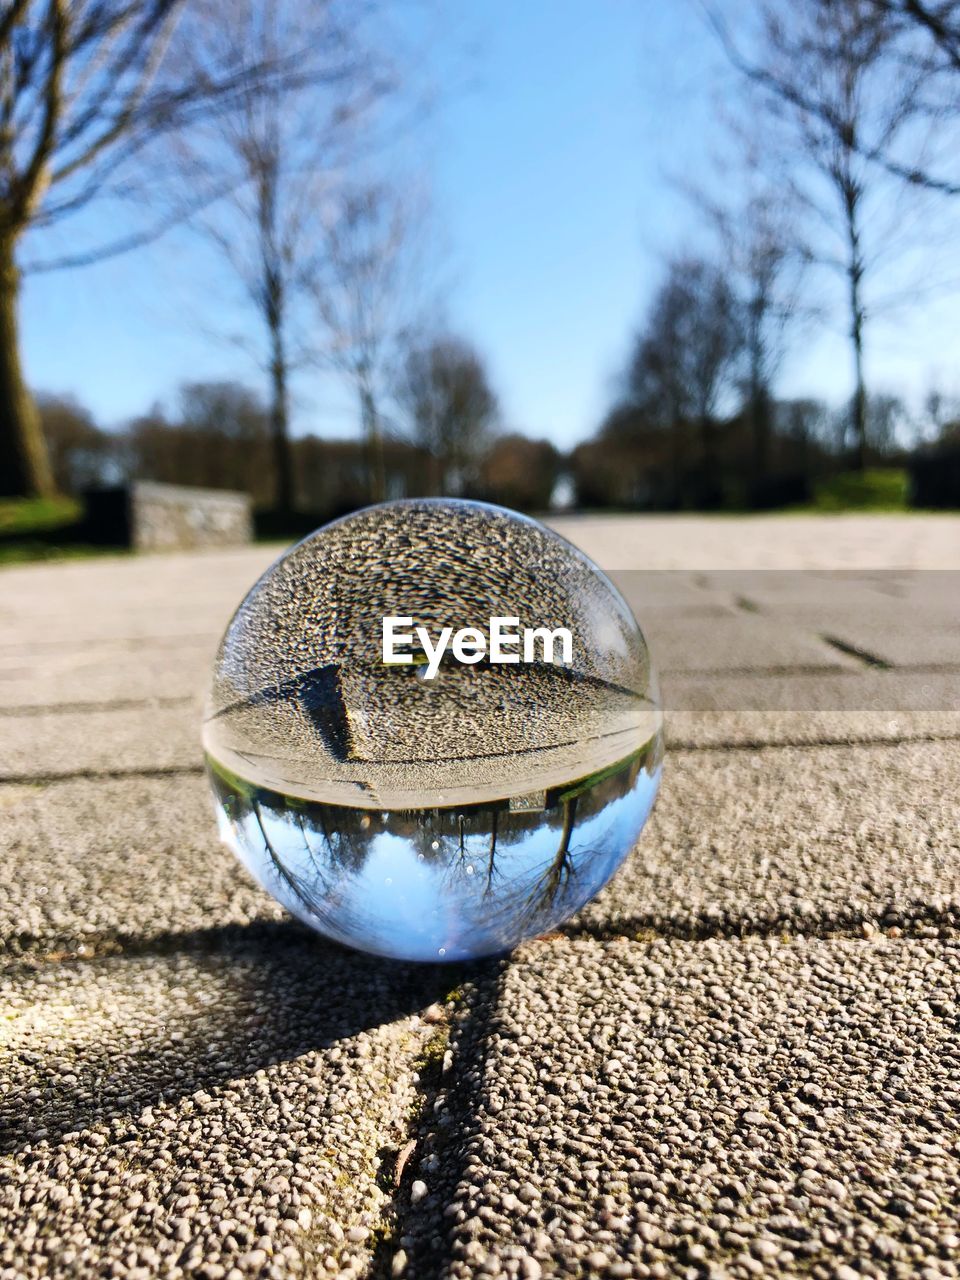 CLOSE-UP OF CRYSTAL BALL ON GLASS AGAINST STREET